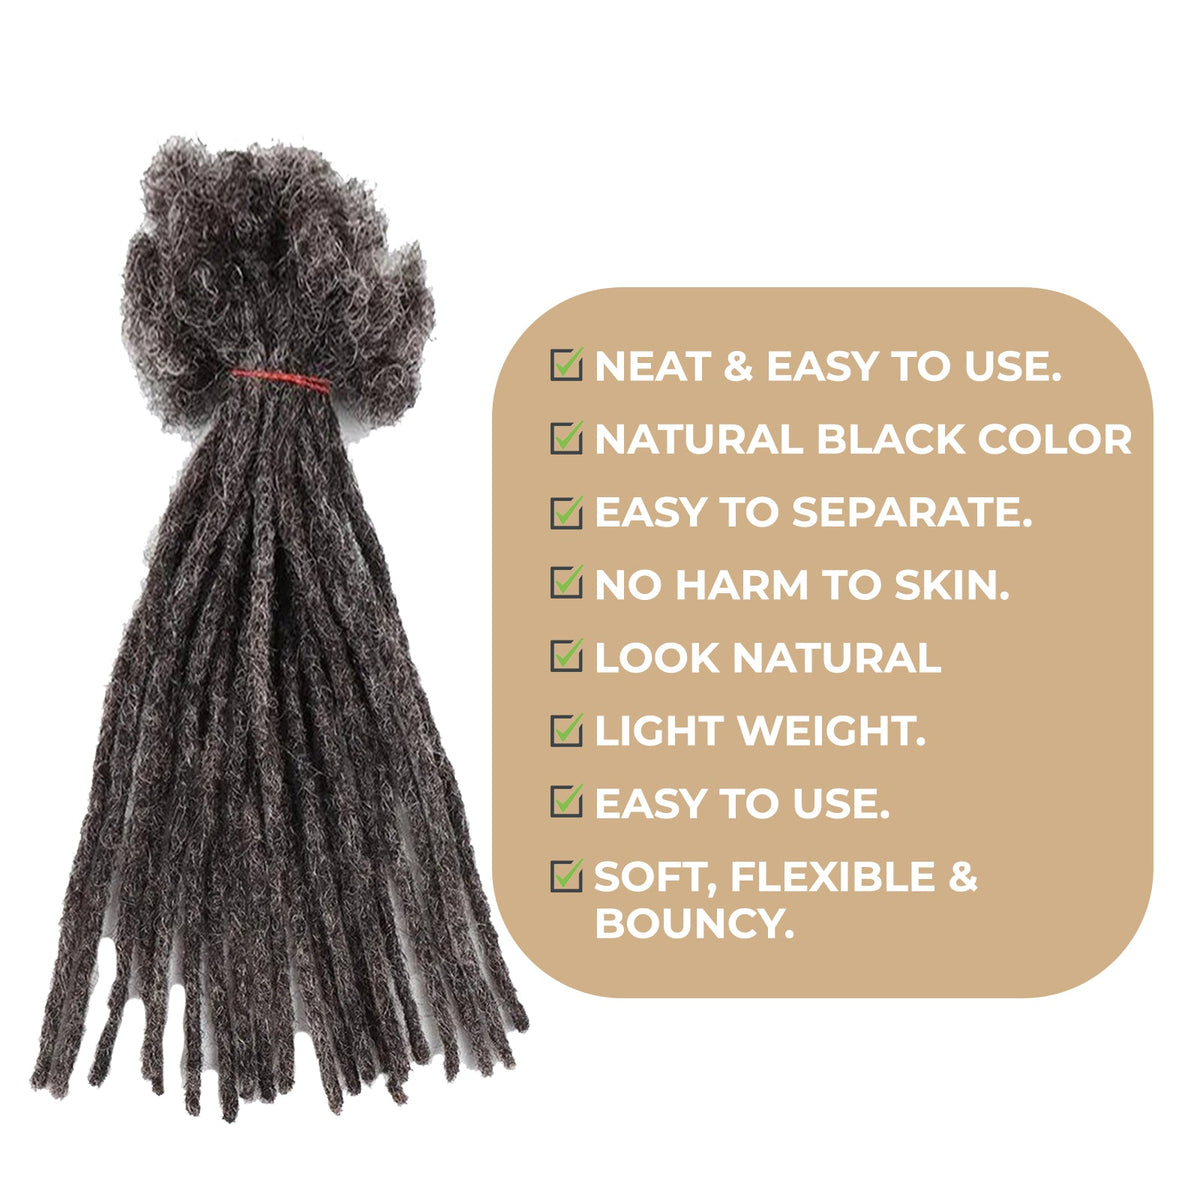 100% Human Hair Dreadlock Extensions 16 Inch 10 Strands Handmade Natural Loc Extensions Human Hair Dreads Extensions For Woman & Men Can Be Dyed/Bleached  (16inch 10 strands, 0.6cm Salt & Pepper)